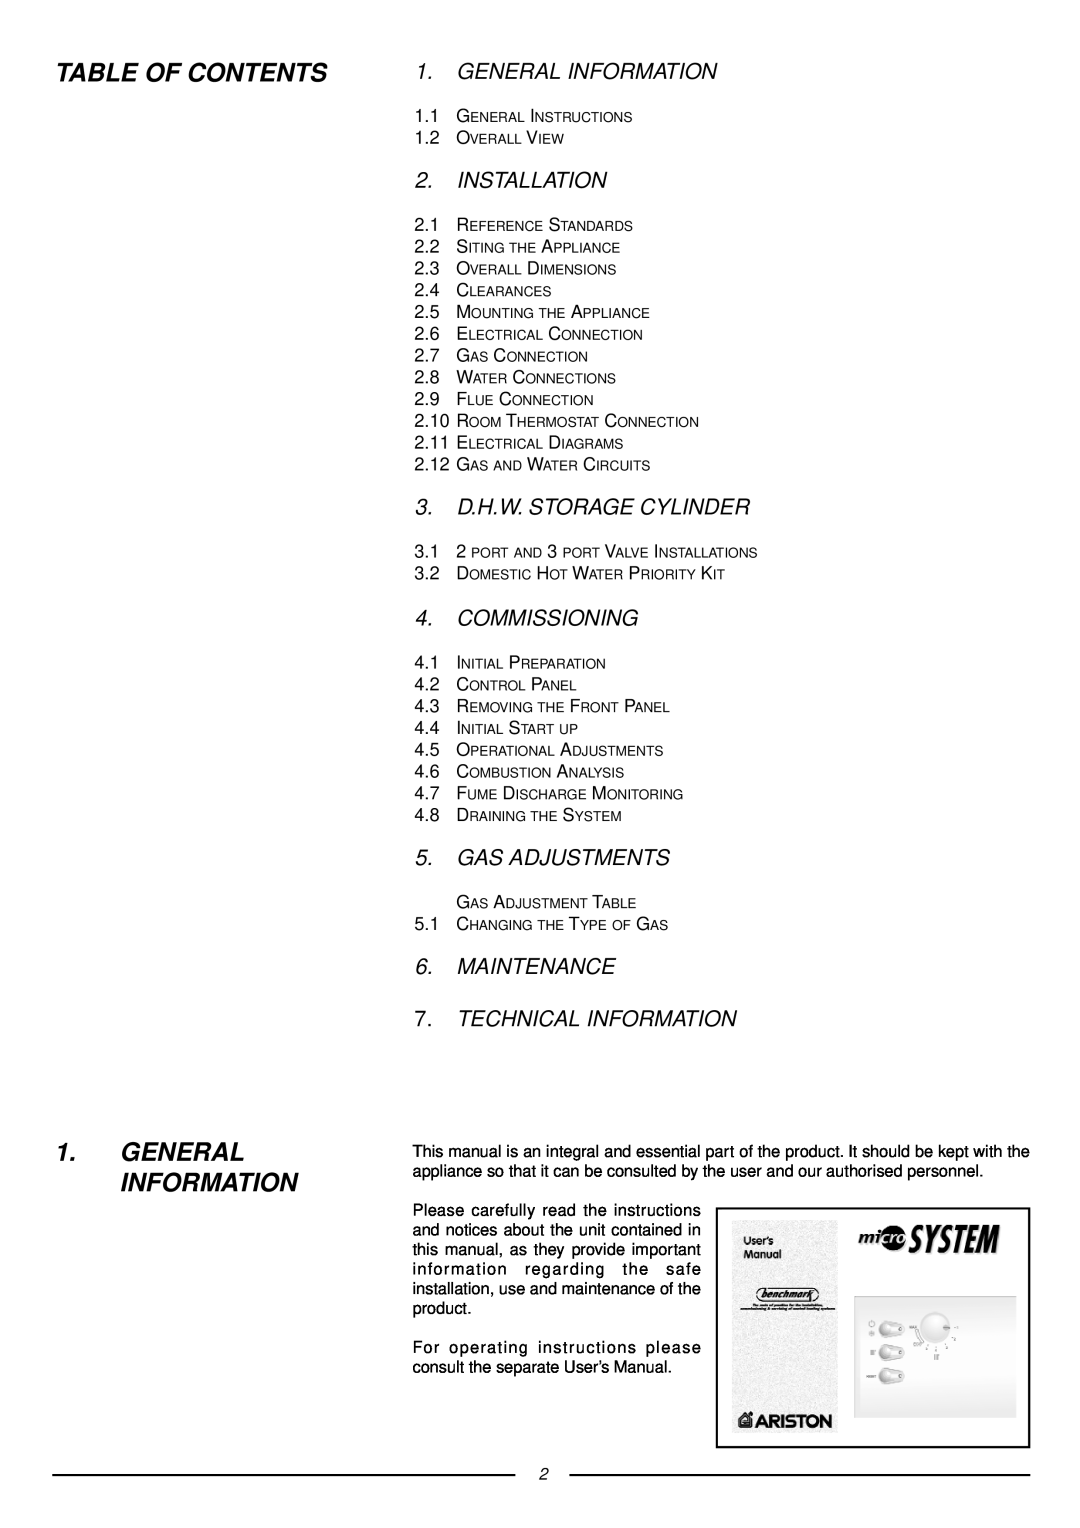 Ariston 41-116-05 Table Of Contents, General Information, Installation, 3. D.H.W. STORAGE CYLINDER, Commissioning 